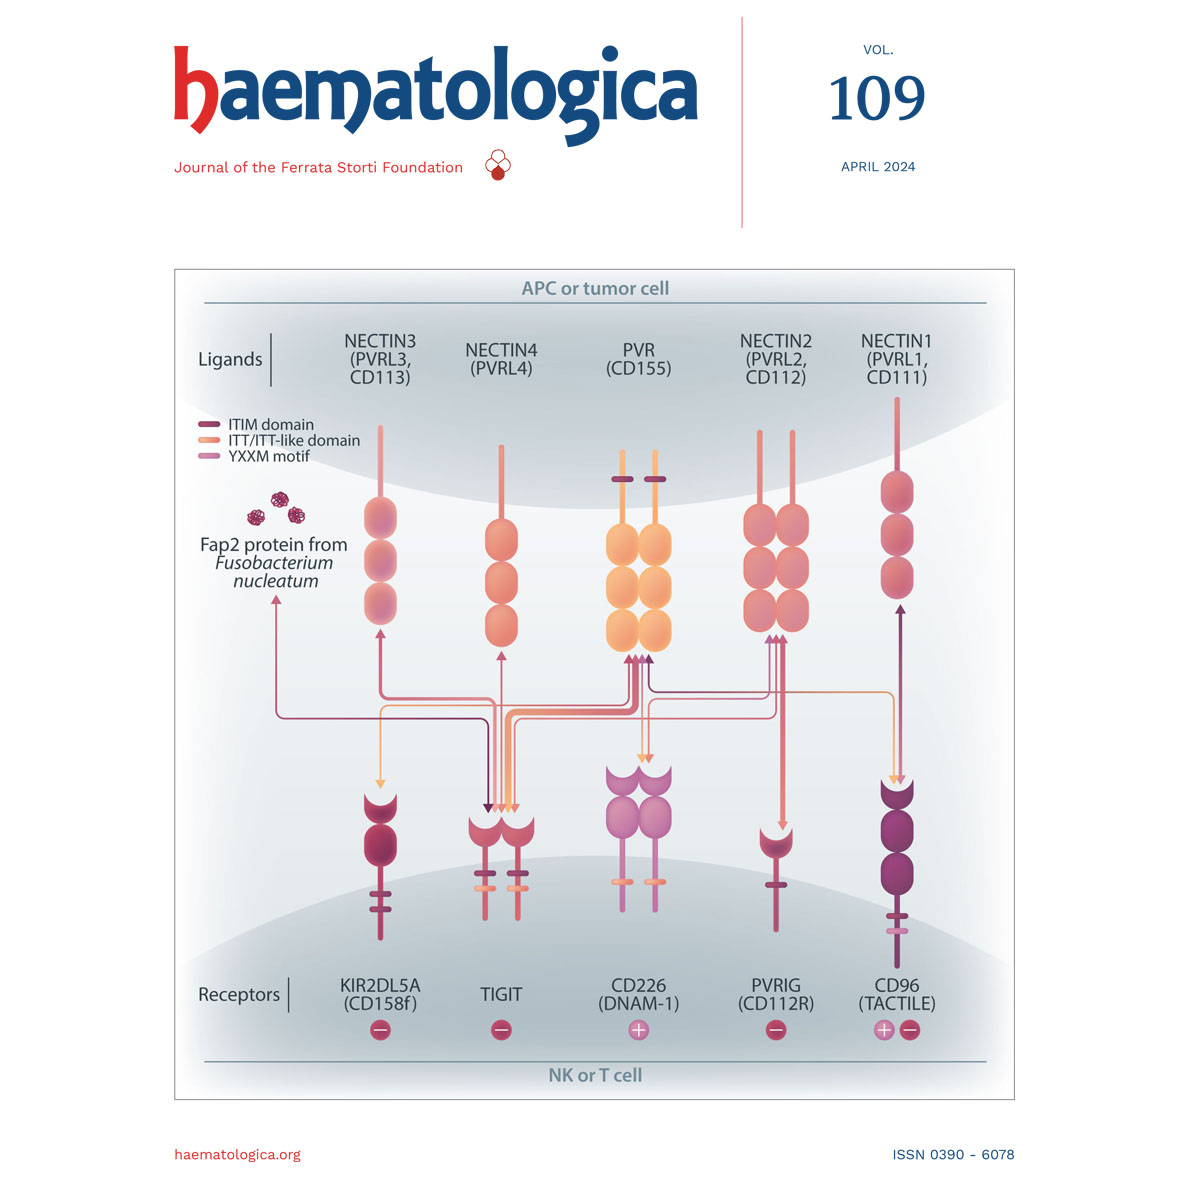 Are eligibility criteria of clinical trials ethical? A new study analyzes the use, variability, and drug safety-based justification of eligibility criteria in #acute_leukemia trials. haematologica.org/article/view/h…